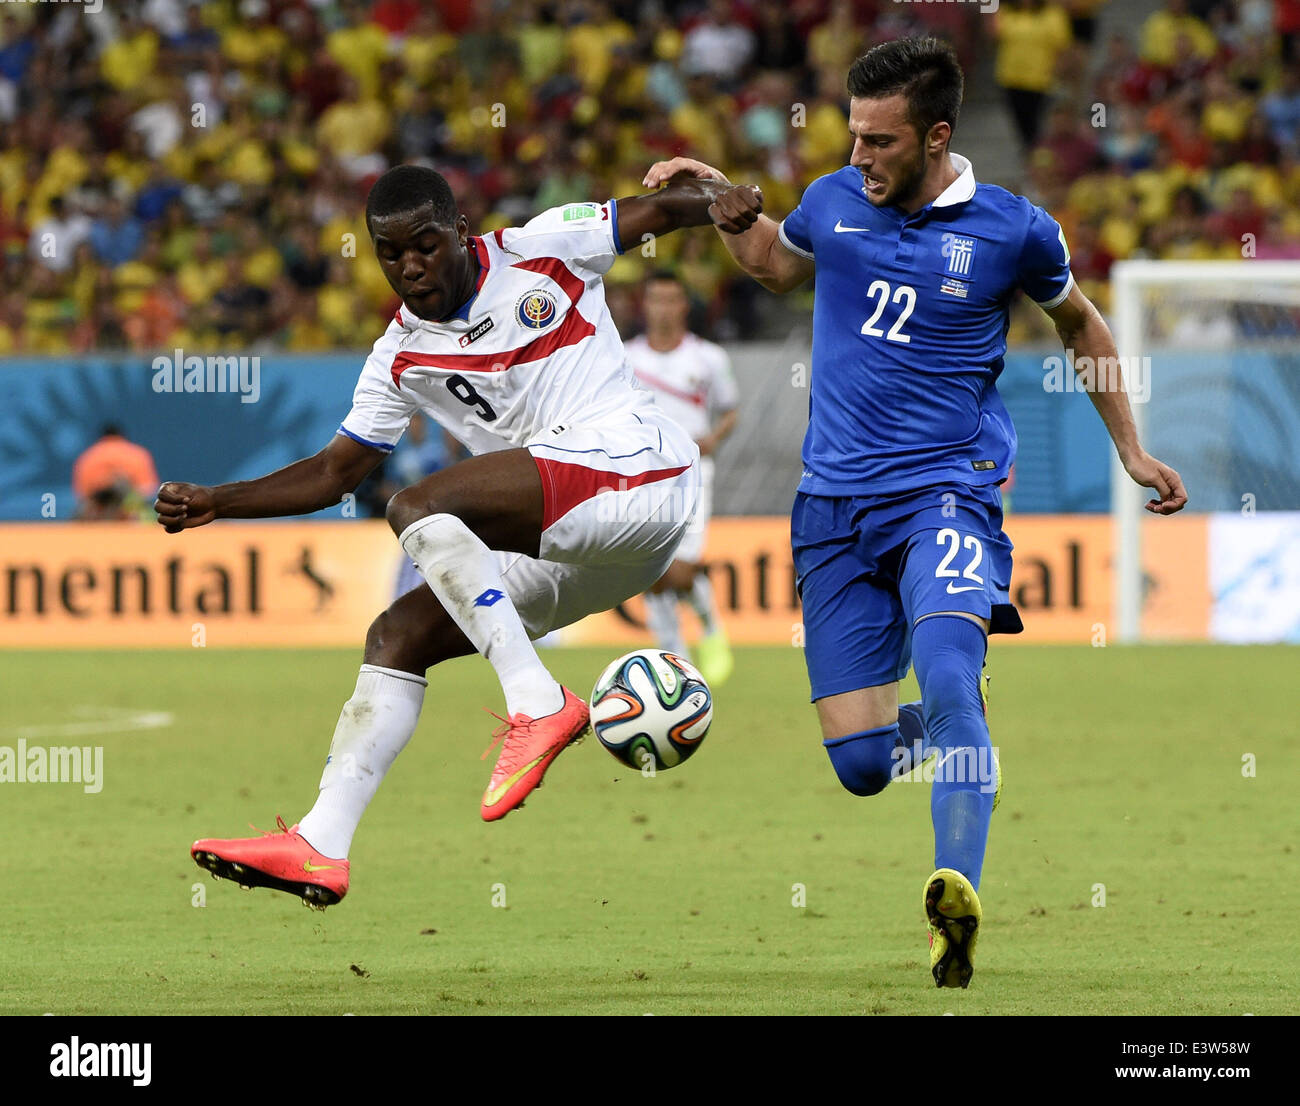 Recife, Brazil. 29th June, 2014. Costa Rica's Joel Campbell (L) vies with Greece's Andreas Samaris during a Round of 16 match between Costa Rica and Greece of 2014 FIFA World Cup at the Arena Pernambuco Stadium in Recife, Brazil, on June 29, 2014. Credit:  Lui Siu Wai/Xinhua/Alamy Live News Stock Photo